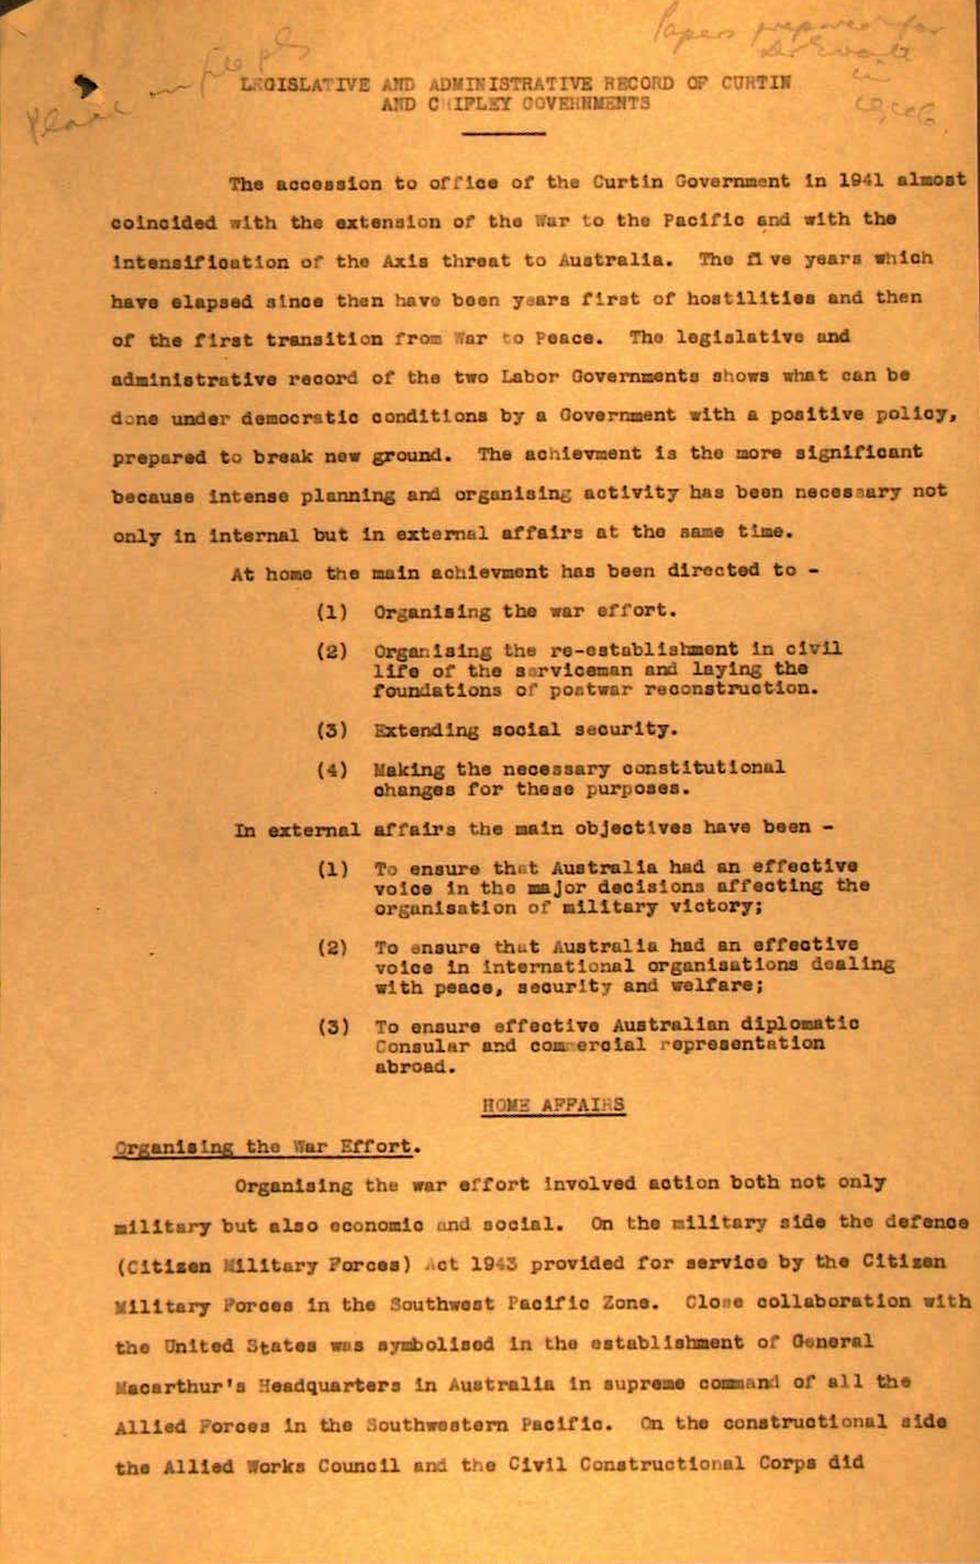 Draft of Prime Minister Chifley’s broadcast titled 'Legislative and administrative record of Curtin and Chifley governments'.